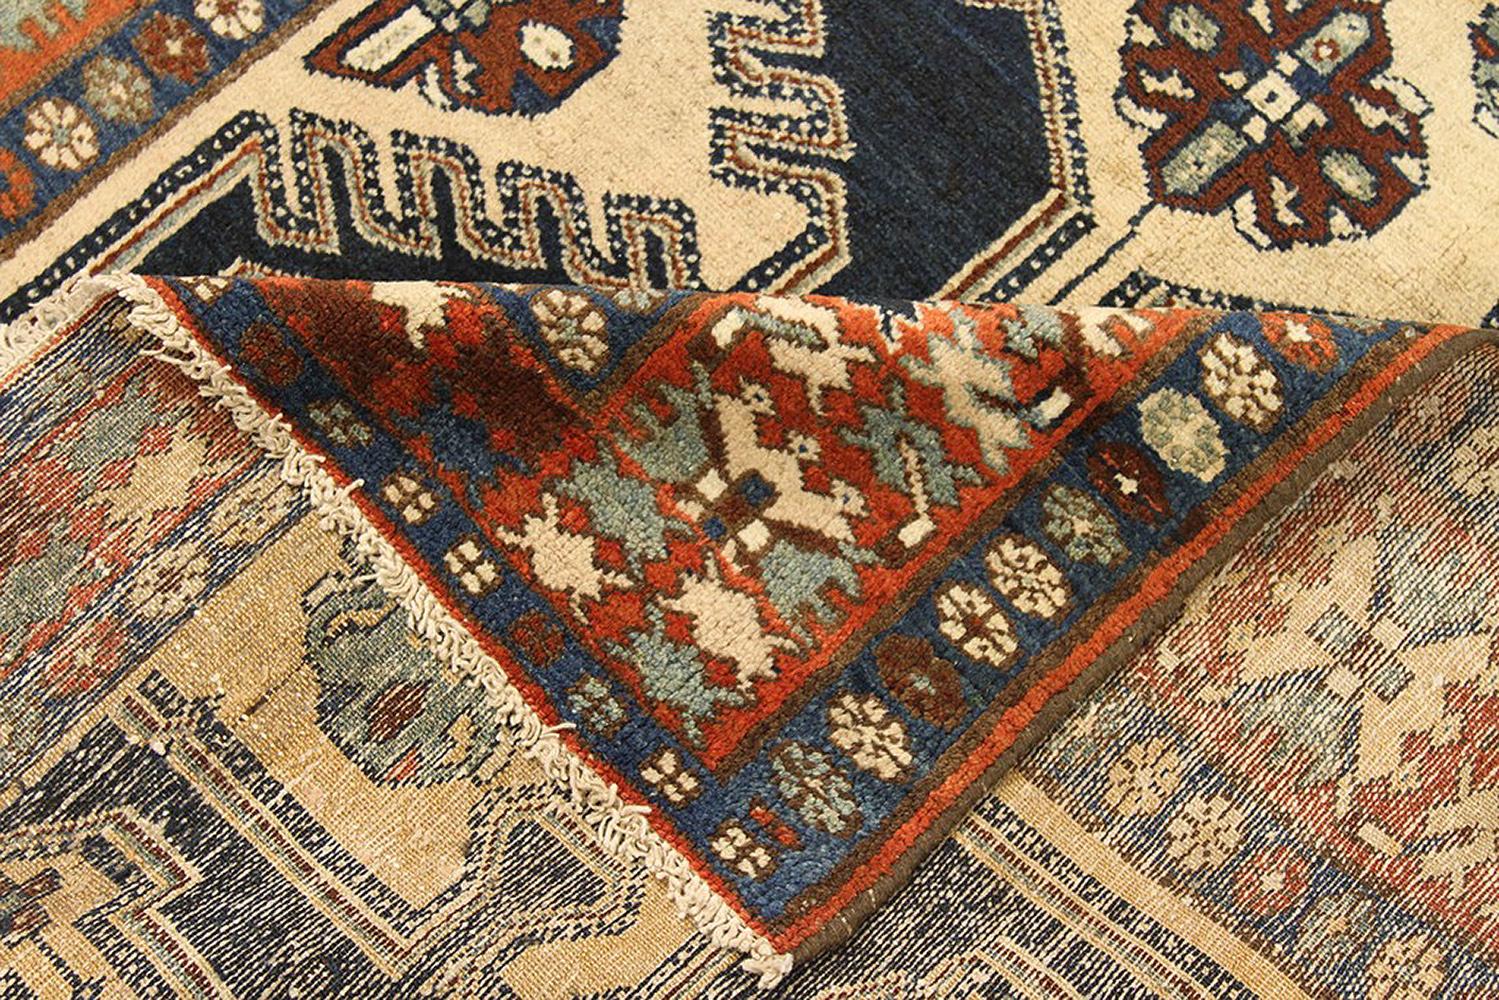 Islamic Antique Persian Hamadan Rug with Gray and Beige Flower Details on Black Field For Sale